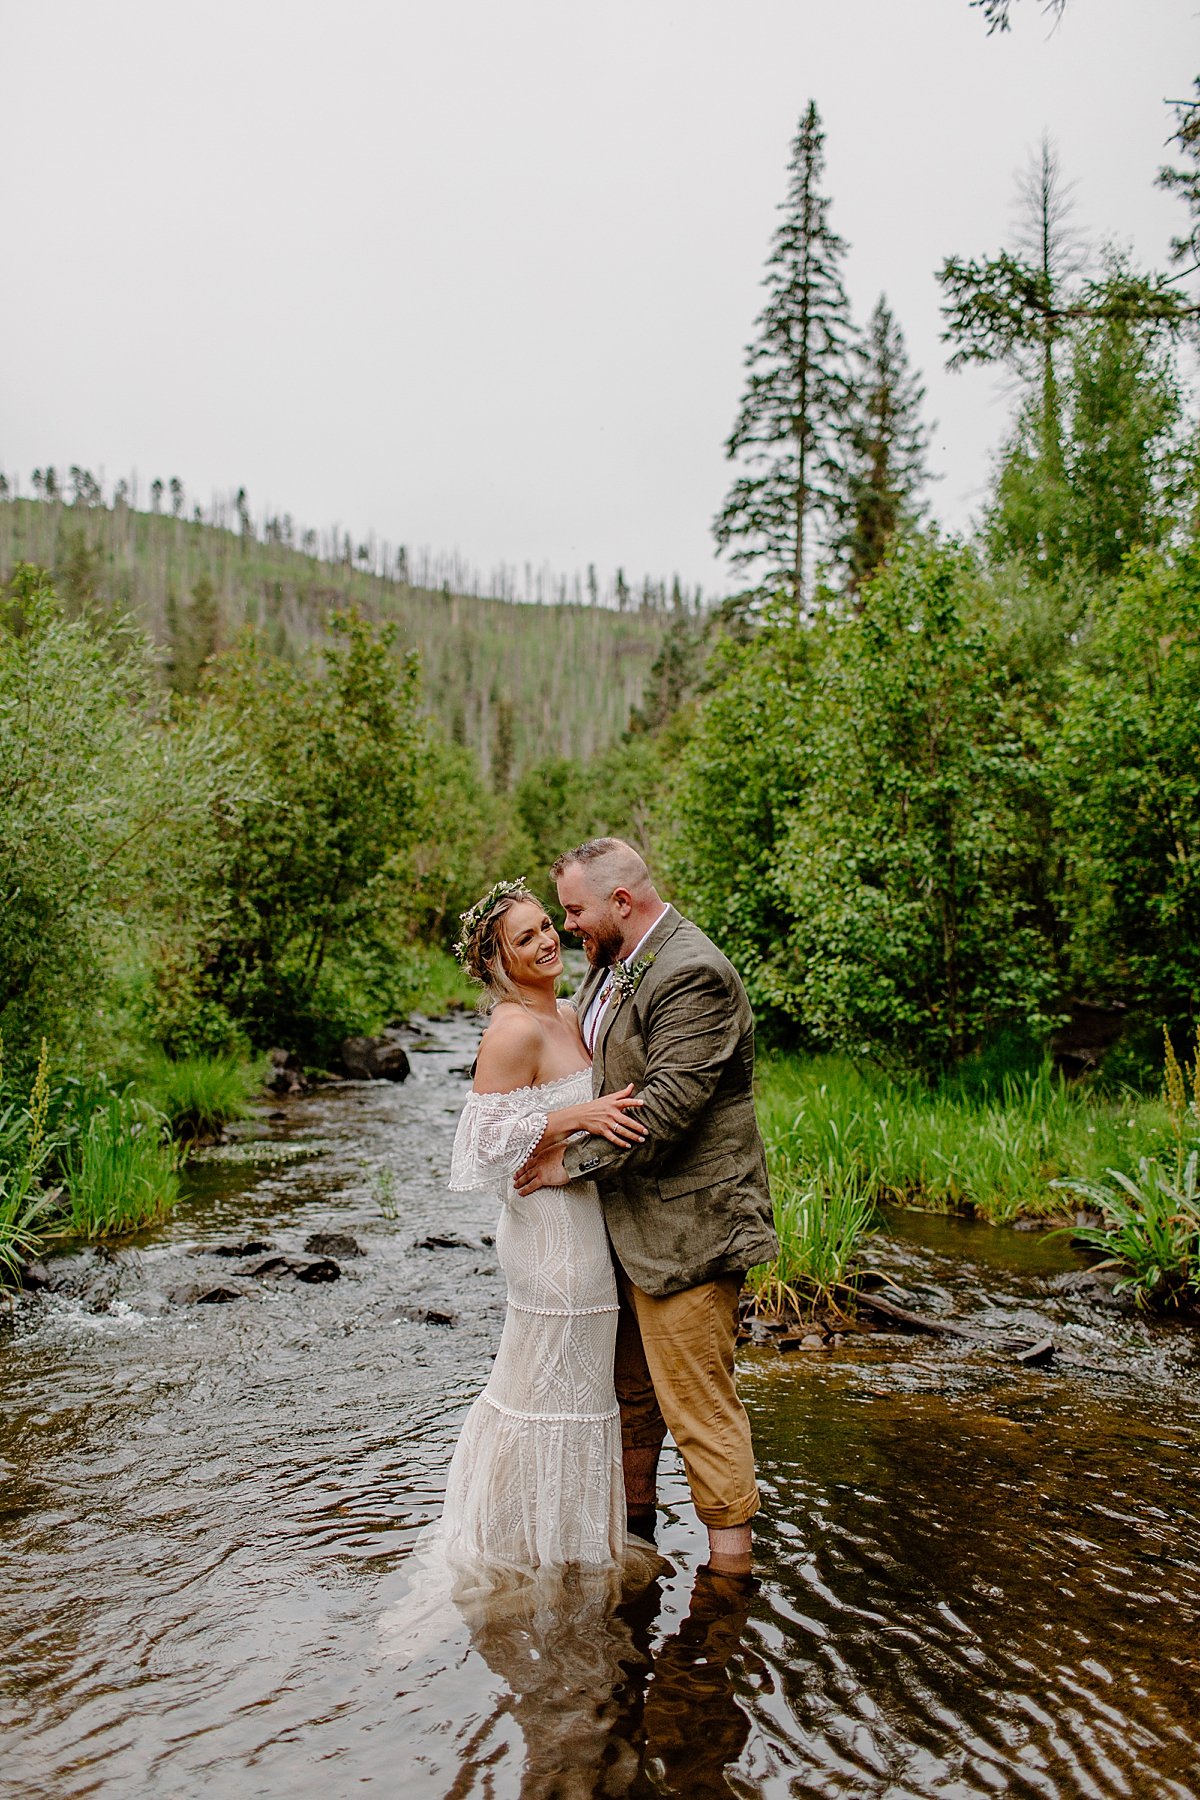  Married couple dancing in the river and wedding attire  by Lucy Bouman 